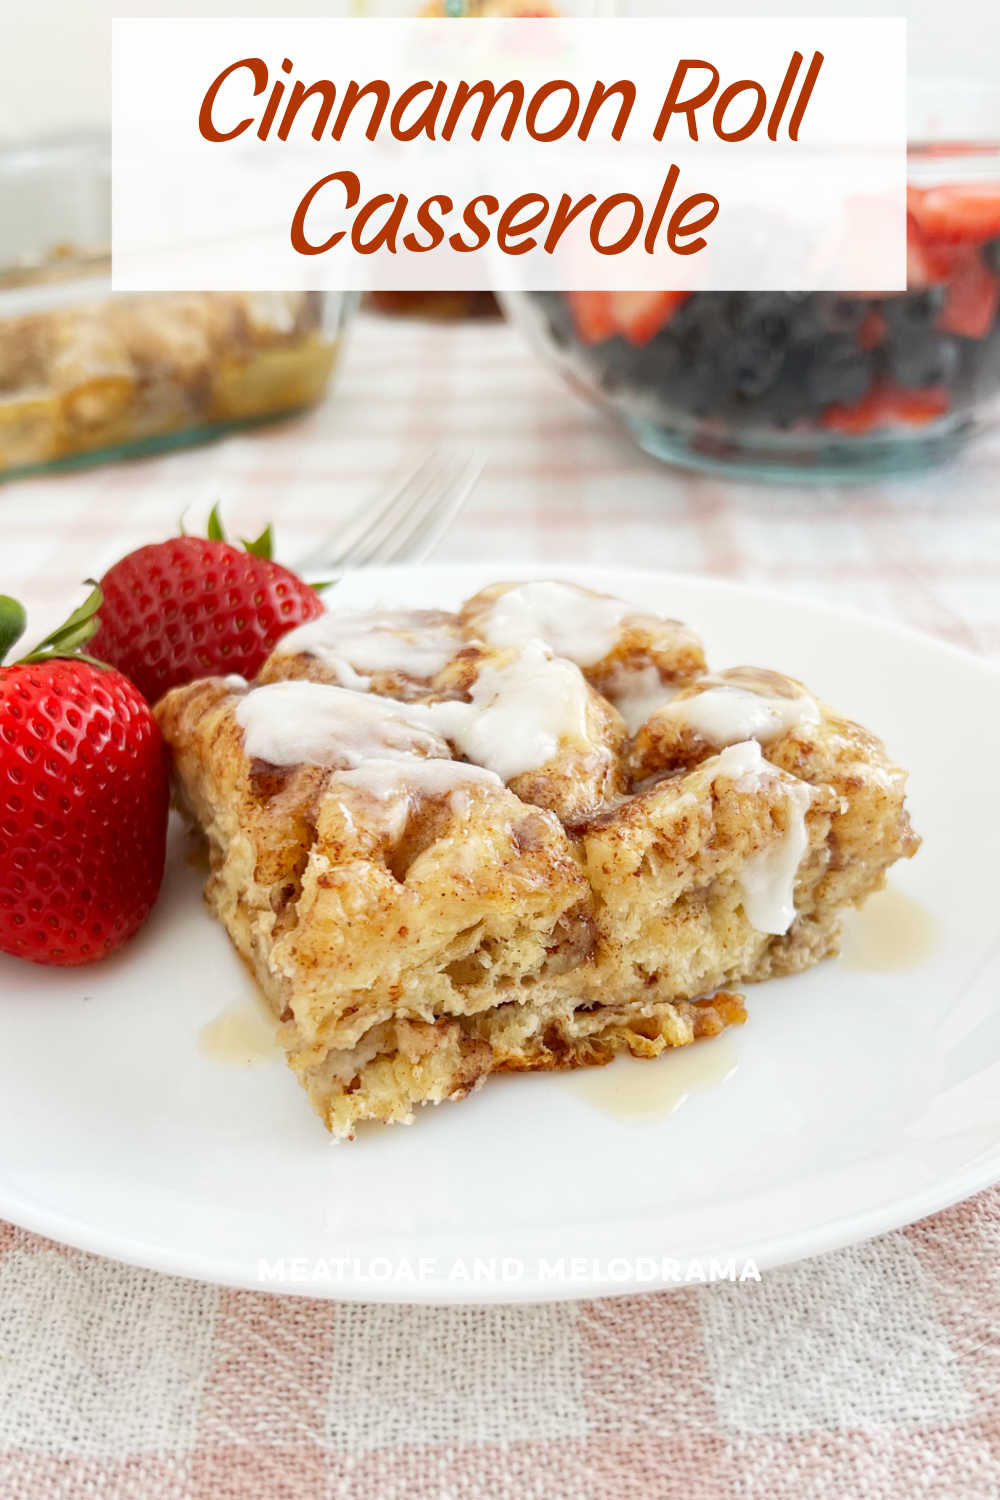 Cinnamon Roll Casserole is an easy recipe for a breakfast bake made with canned cinnamon rolls. Perfect for a weekend breakfast or holiday brunch! The whole family will love this breakfast casserole! via @meamel